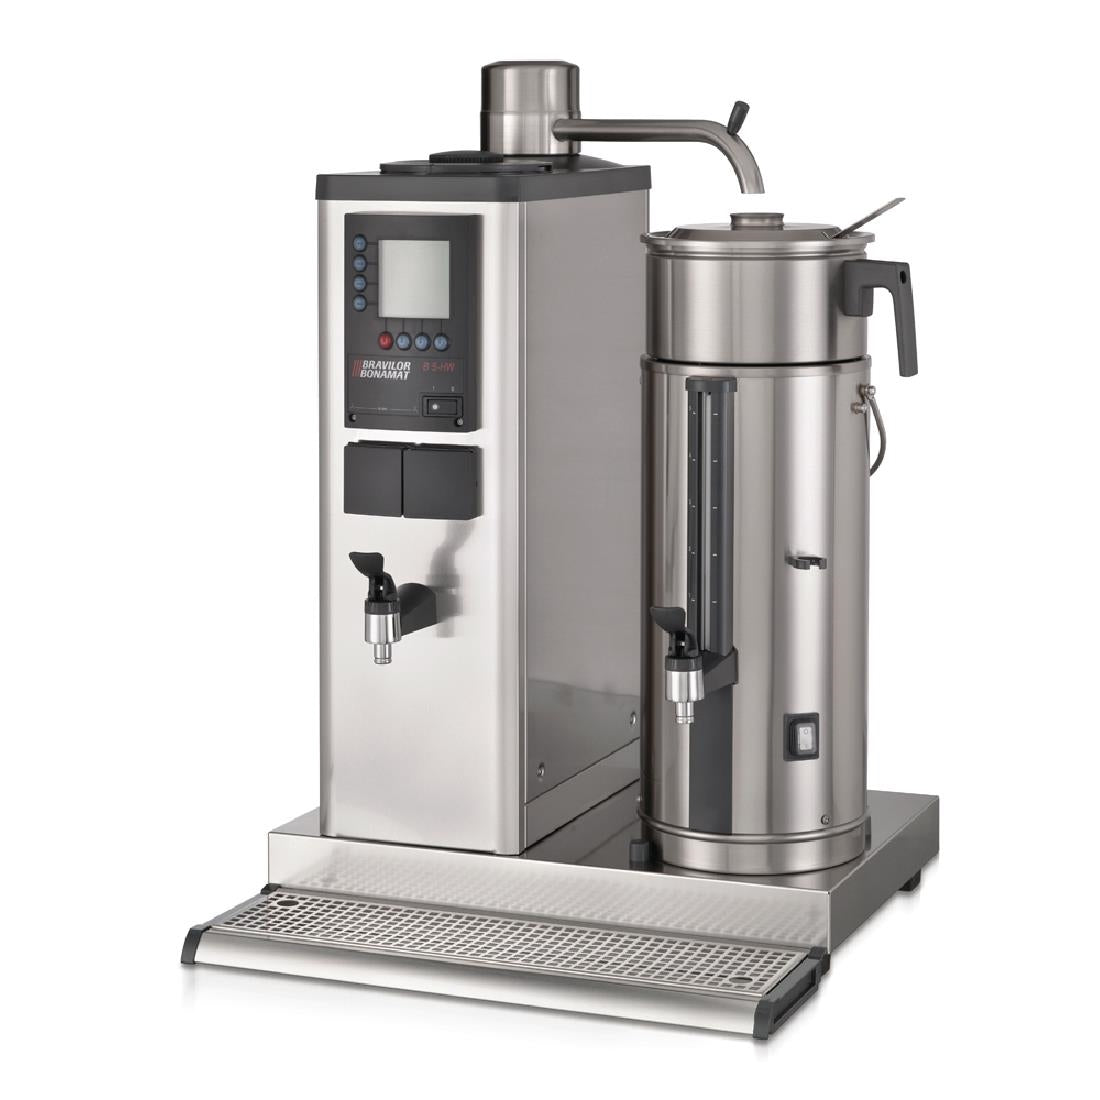 DC689 Bravilor B10 HWR Bulk Coffee Brewer with 10Ltr Coffee Urn and Hot Water Tap 3 Phase JD Catering Equipment Solutions Ltd